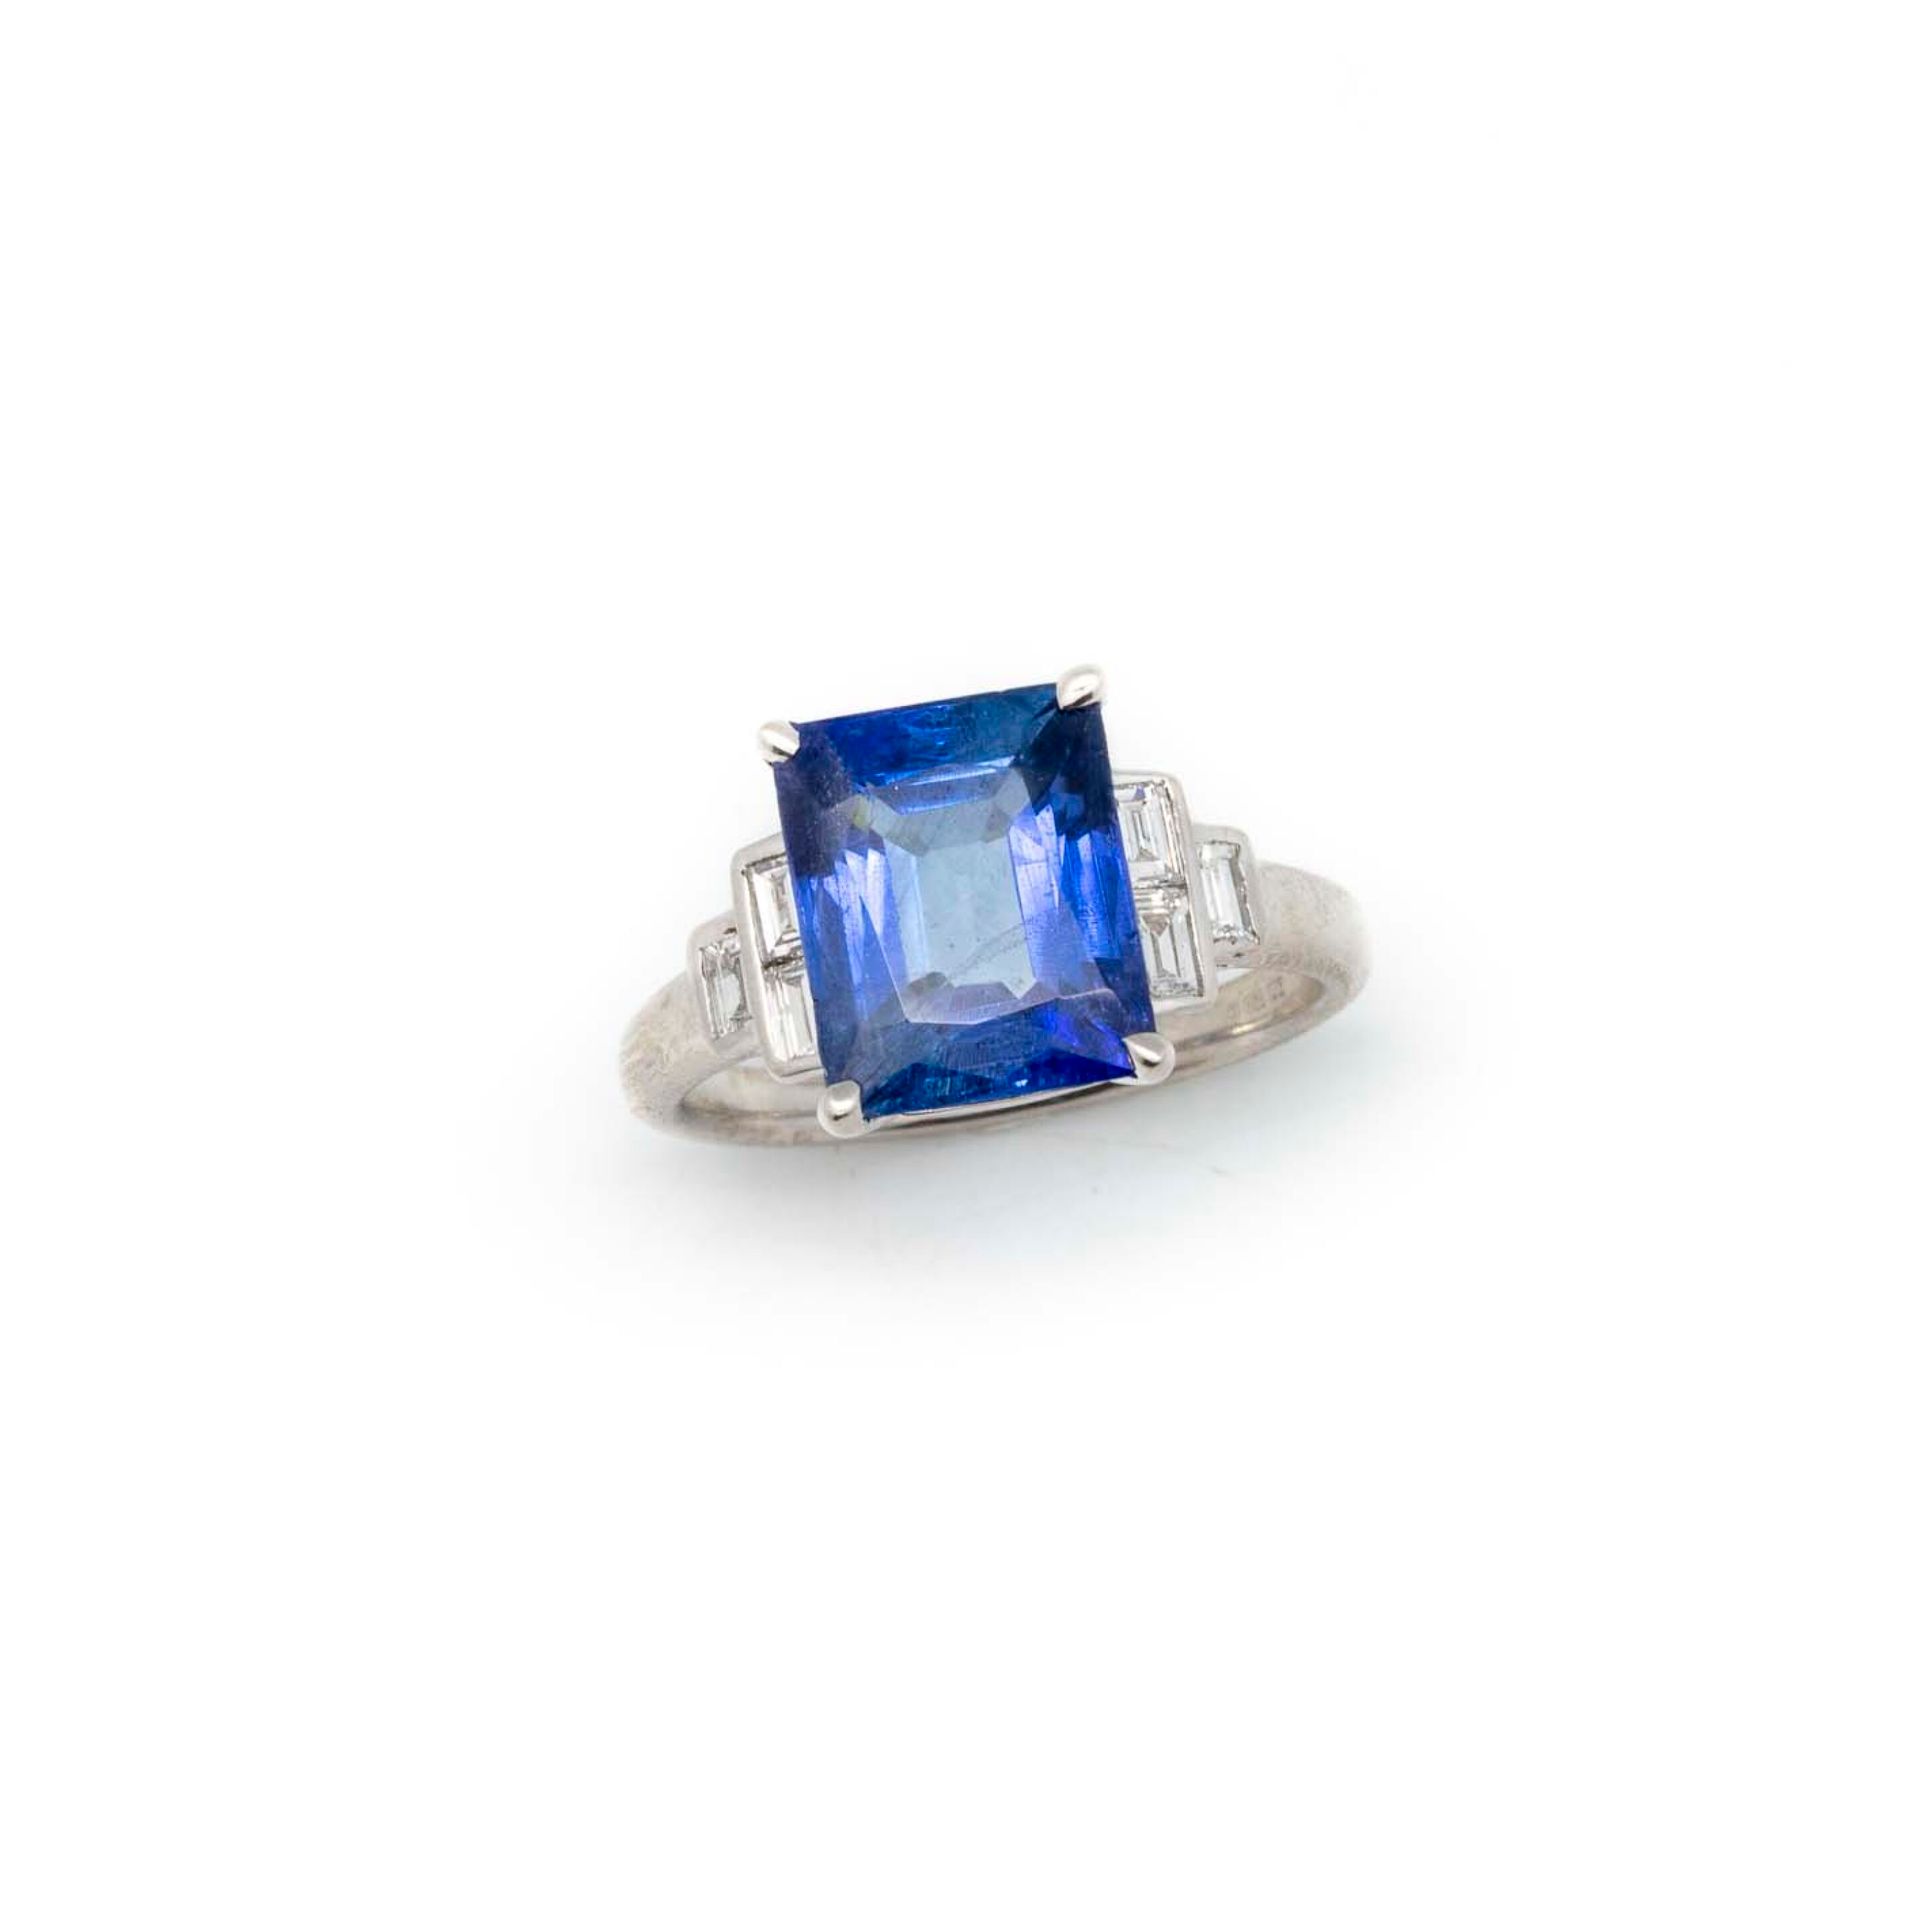 Null White gold ring set with a Ceylon sapphire weighing 5.97 ct. With tiered ba&hellip;